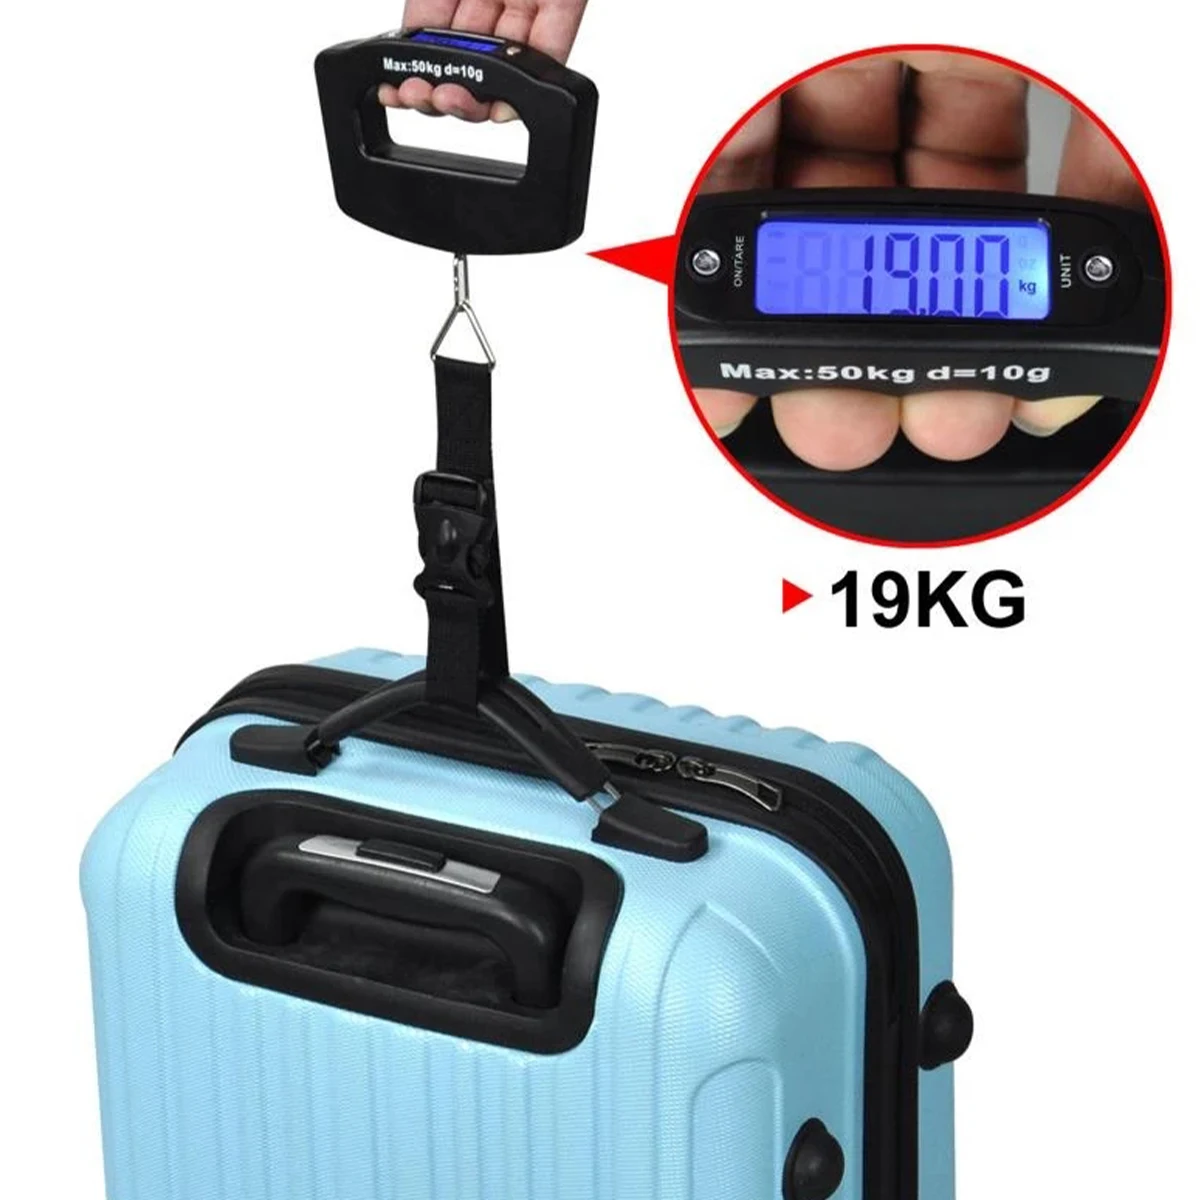 https://ae01.alicdn.com/kf/S3d19cc0944ac48e2846f3c53953d4a49S/50kg-Digital-Luggage-Scale-Electronic-Portable-Suitcase-Baggage-Bag-Weight-Tool-With-Backlight-Electronic-Travel-Hanging.jpg